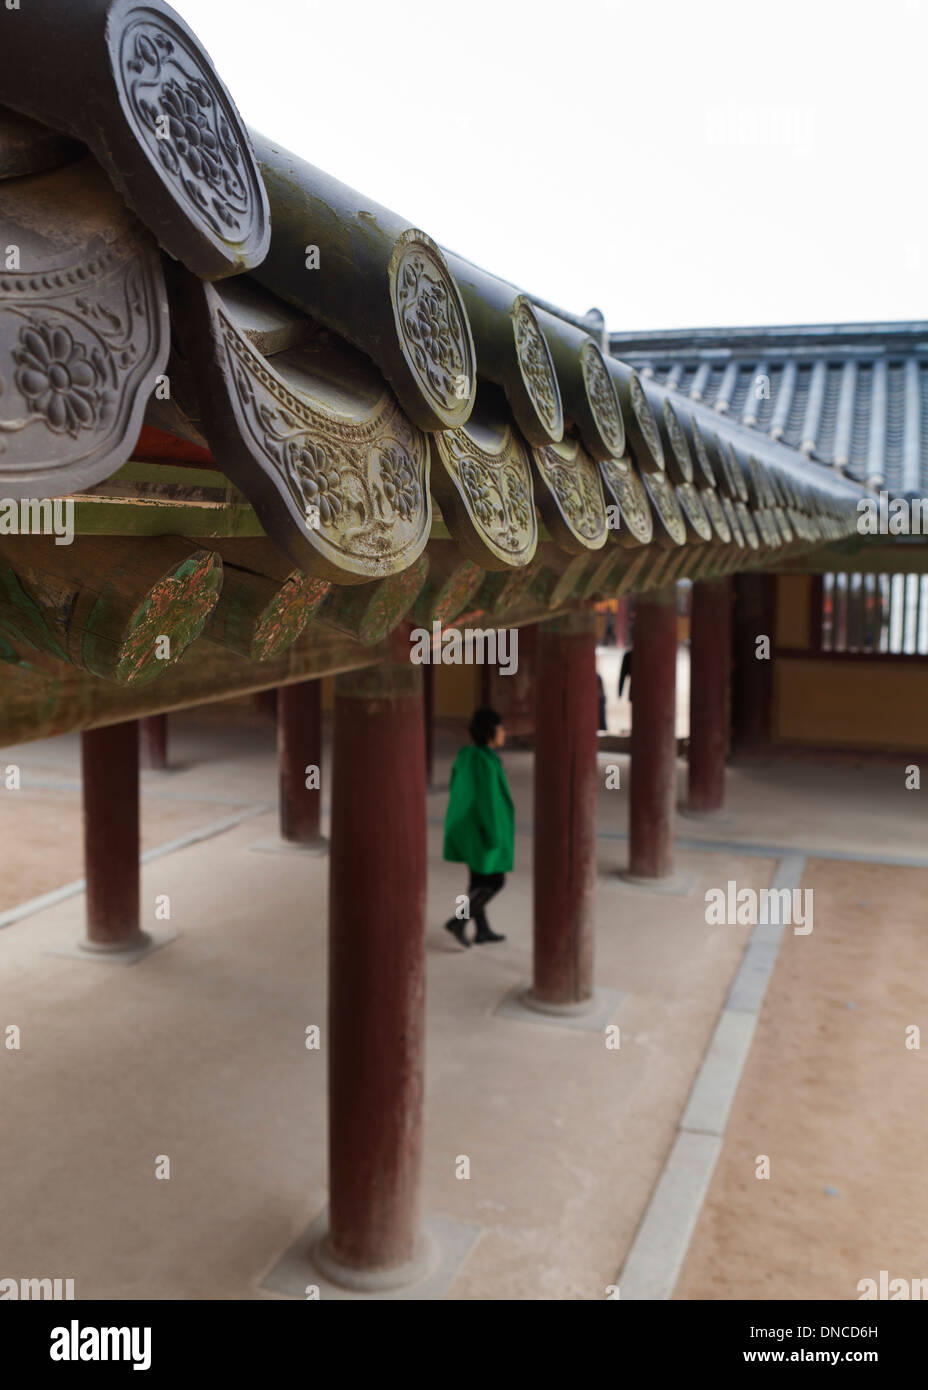 Giwa (fired clay roof tiles) used on  traditional Hanok architecture - South Korea Stock Photo